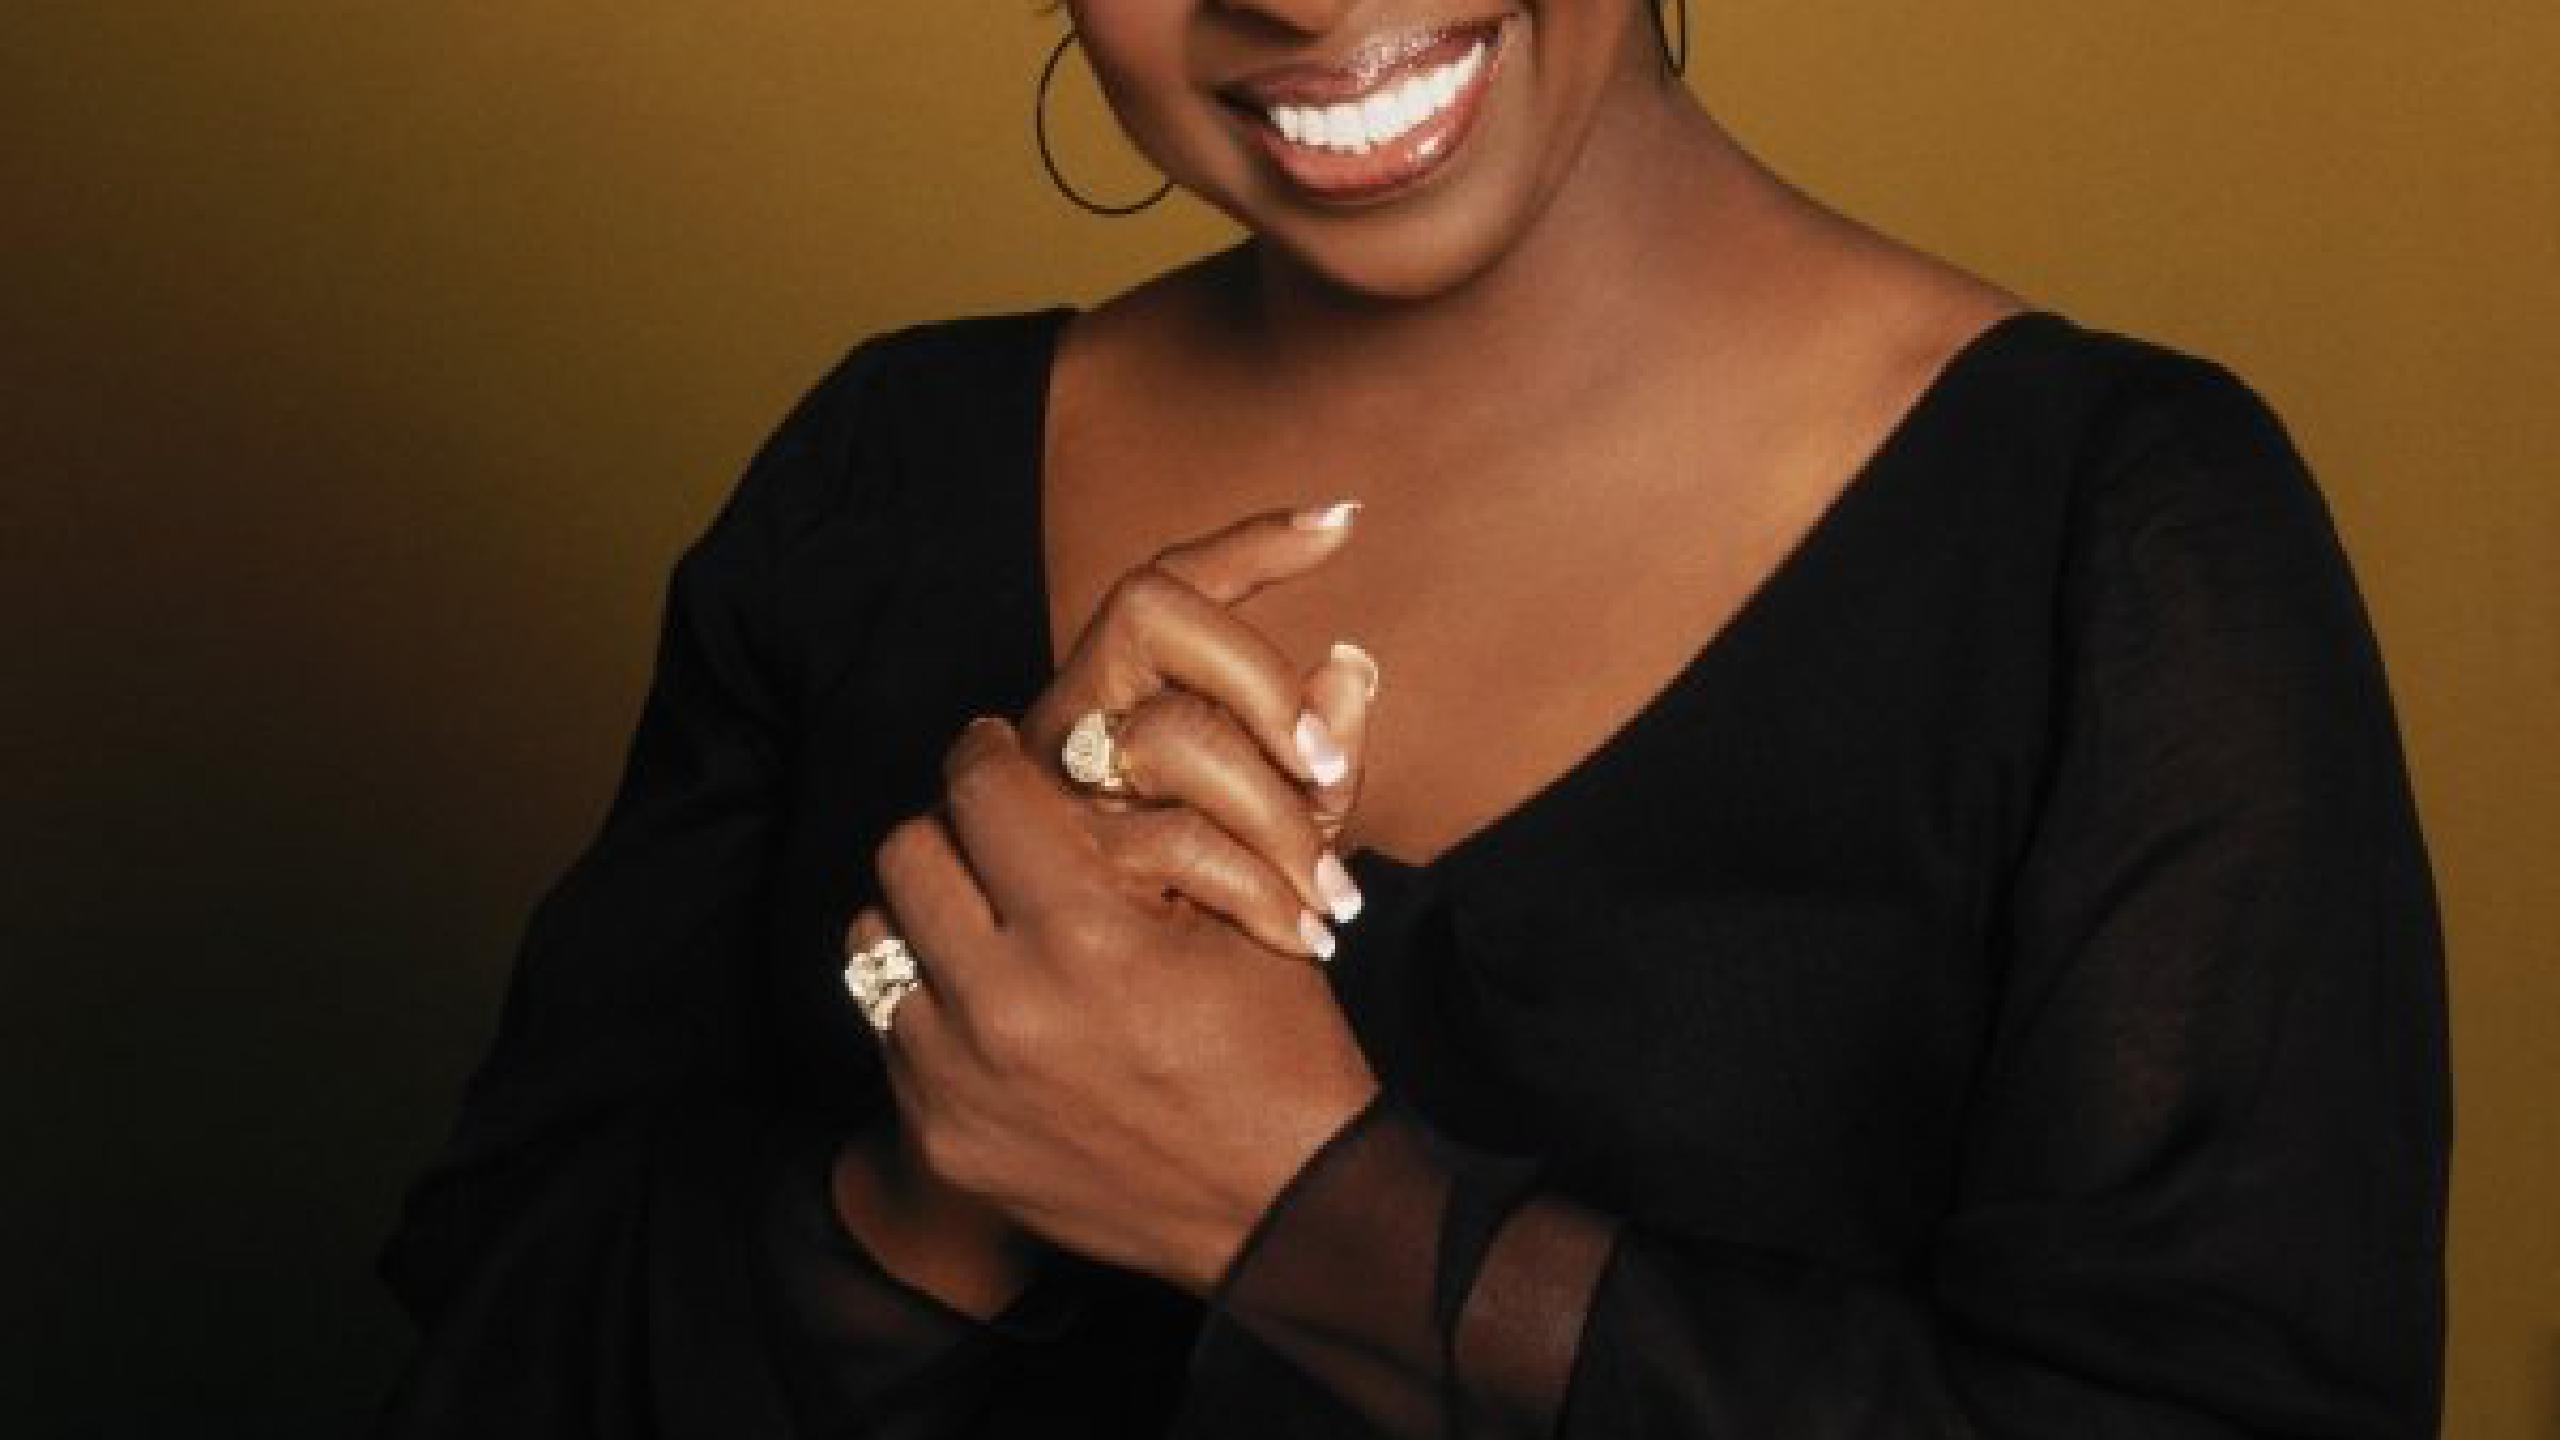 Gladys Knight Wallpapers